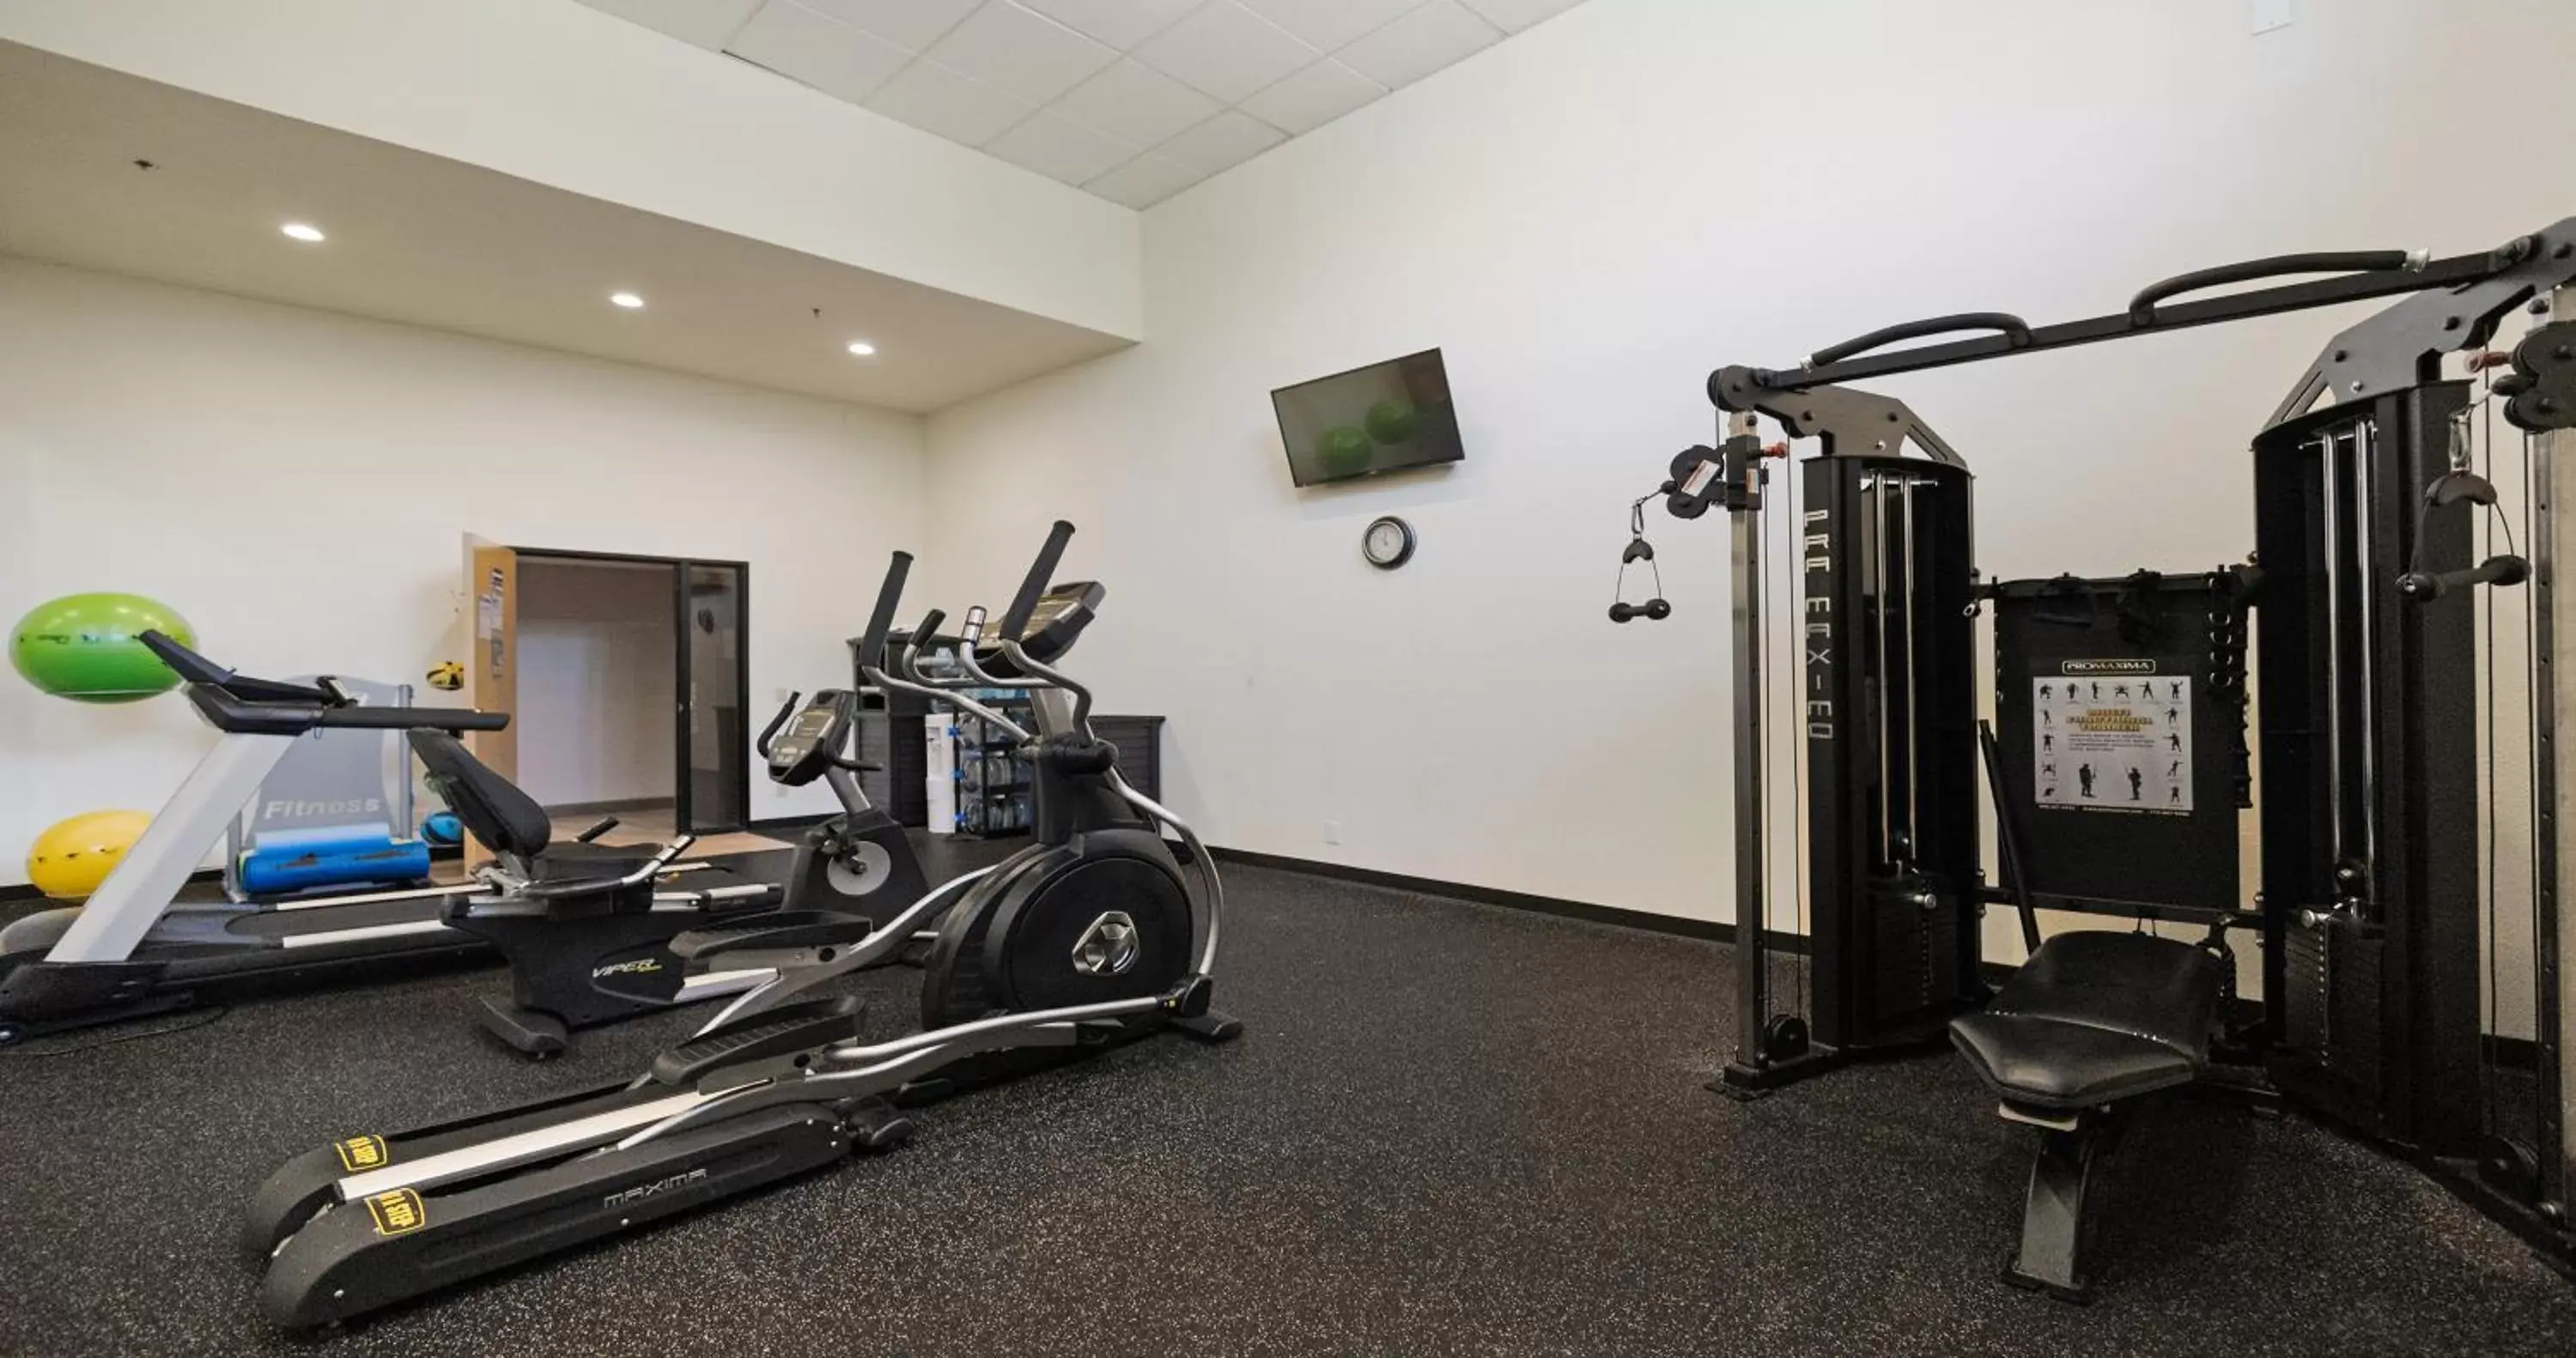 Fitness centre/facilities, Fitness Center/Facilities in Best Western Heritage Inn Chico